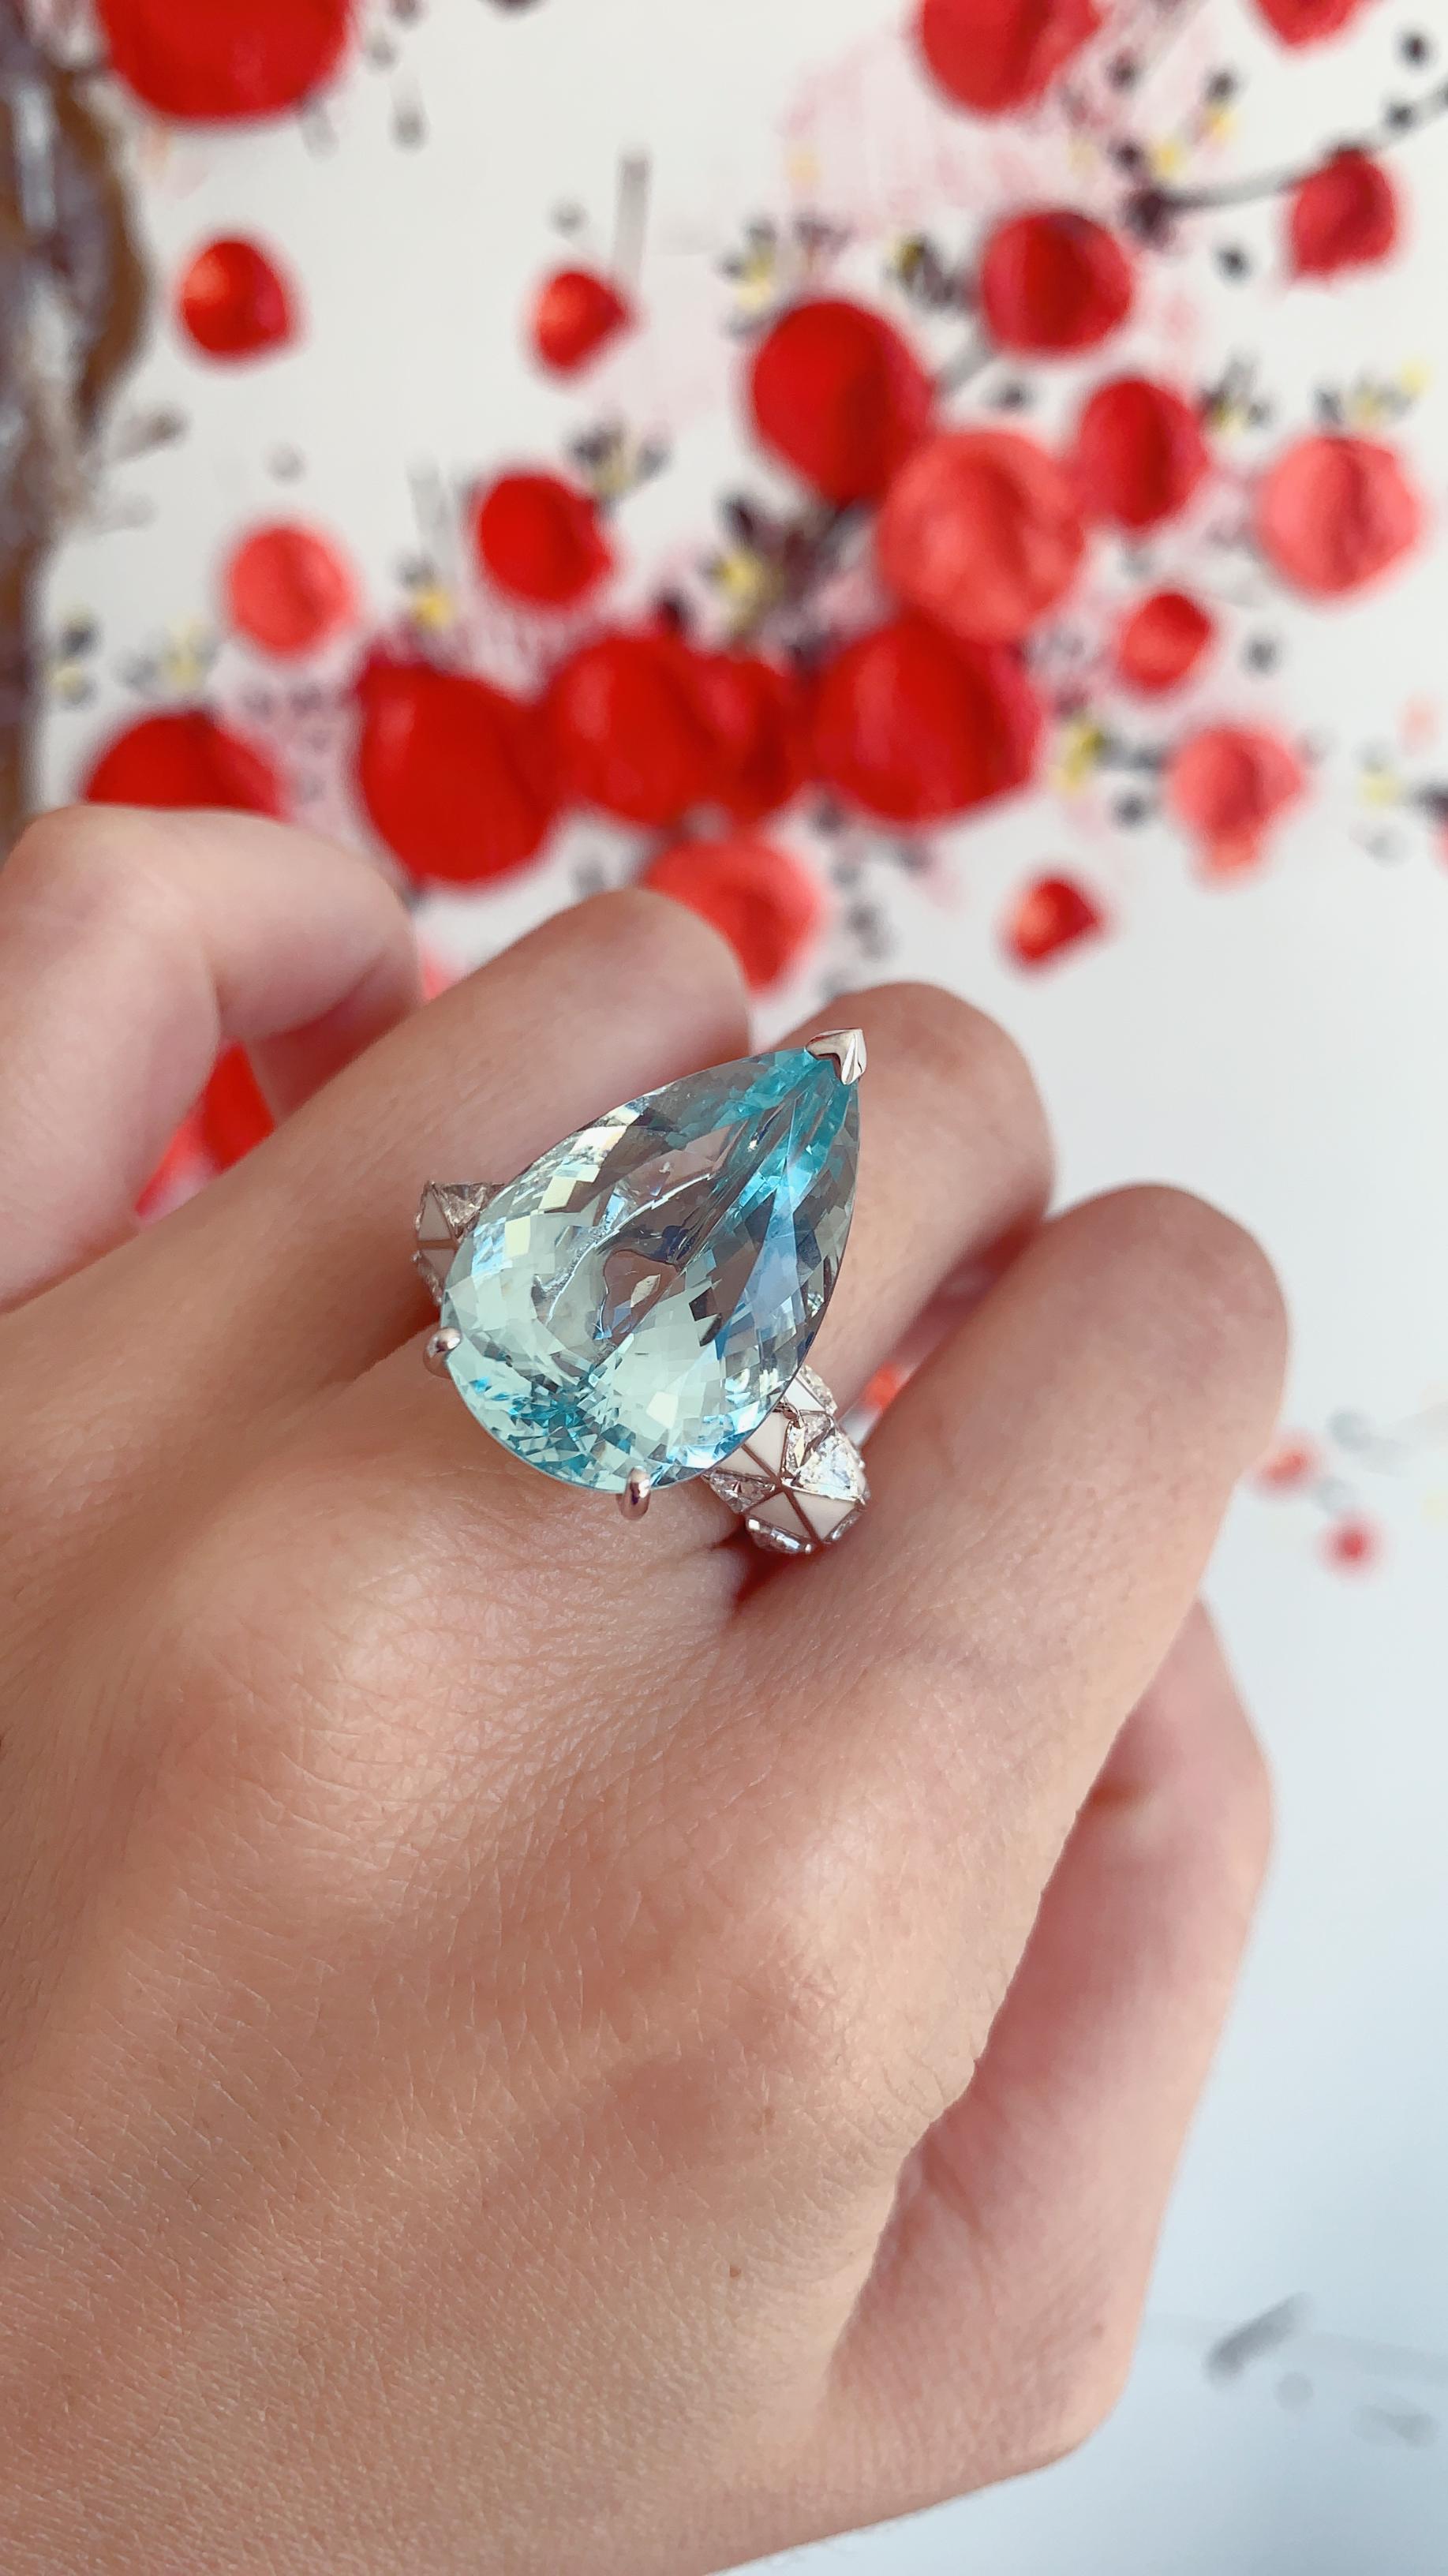 A Pear-Cut Aquamarine, Diamond and Enamel Gold Ring in the Candy Collection by Jewelry Designer, Sarah Ho.

This 16.3ct pear cut Aquamarine coolly sits among 1.3ct trillion diamonds and ice white enamel in 18kt white gold. 	

The Ring is an English